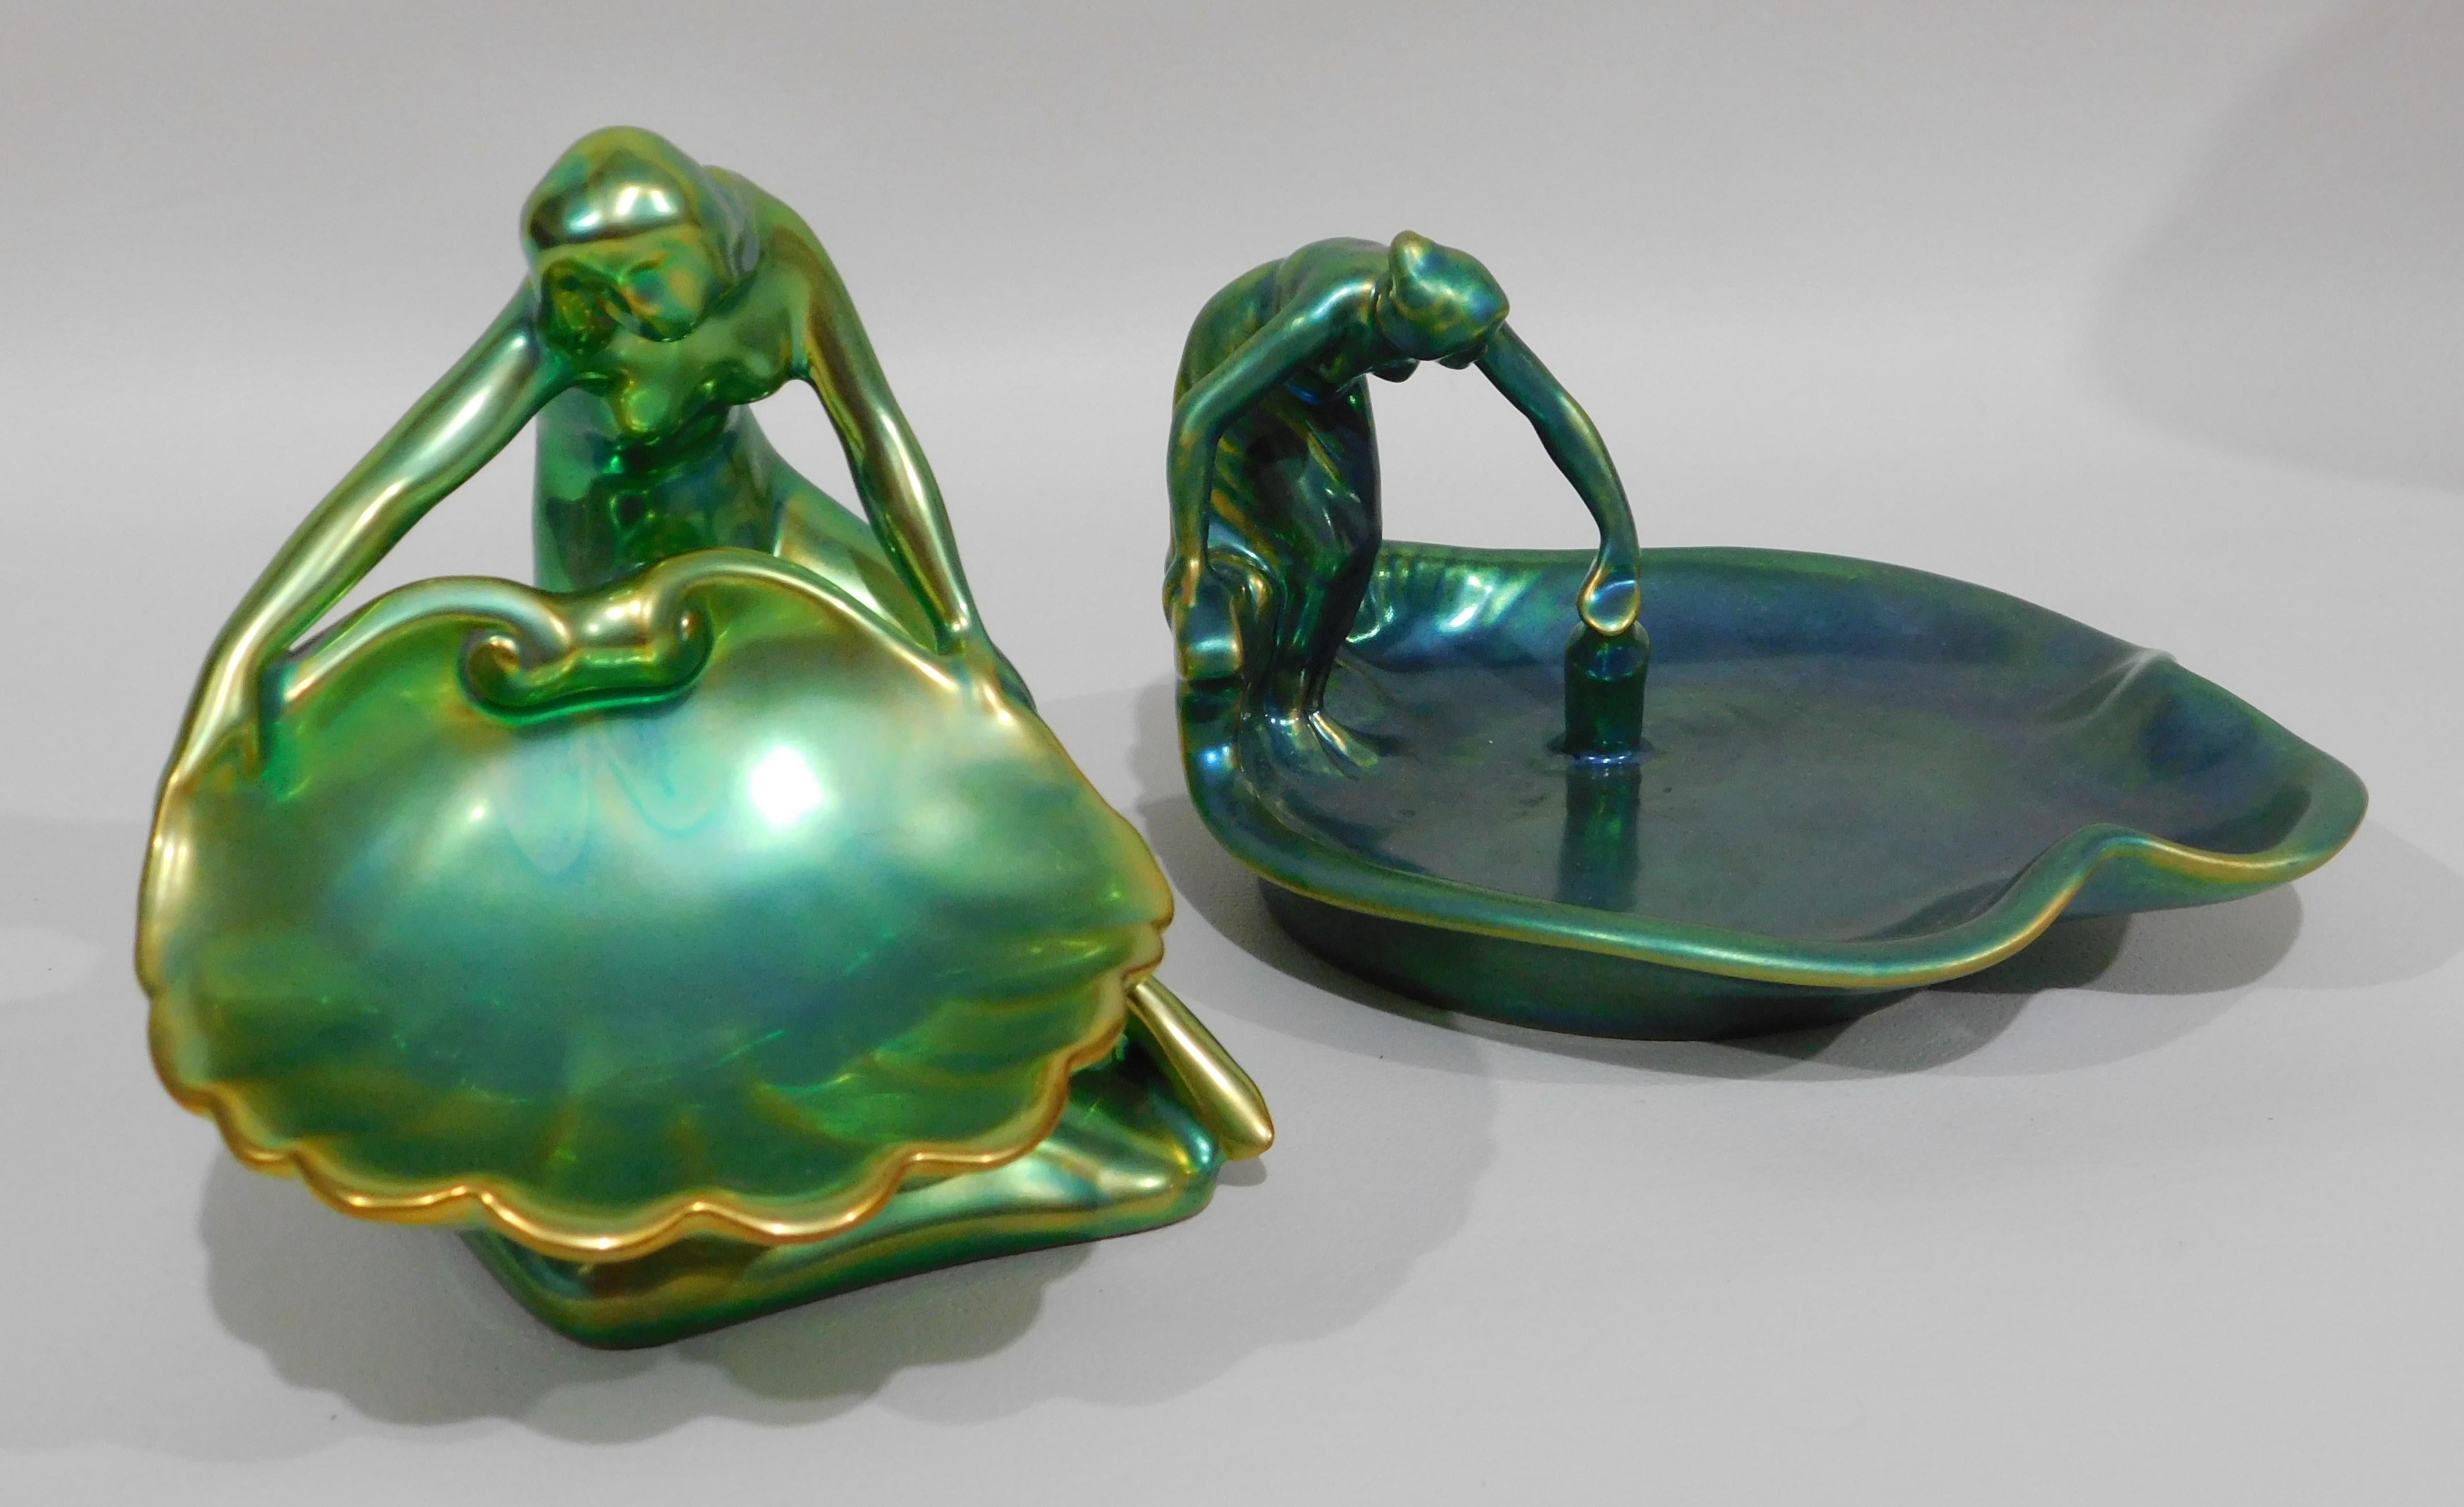 Pair of Zsolnay Decorative Ceramic Figurative Dishes with Eosin Glaze In Good Condition For Sale In Hamilton, Ontario